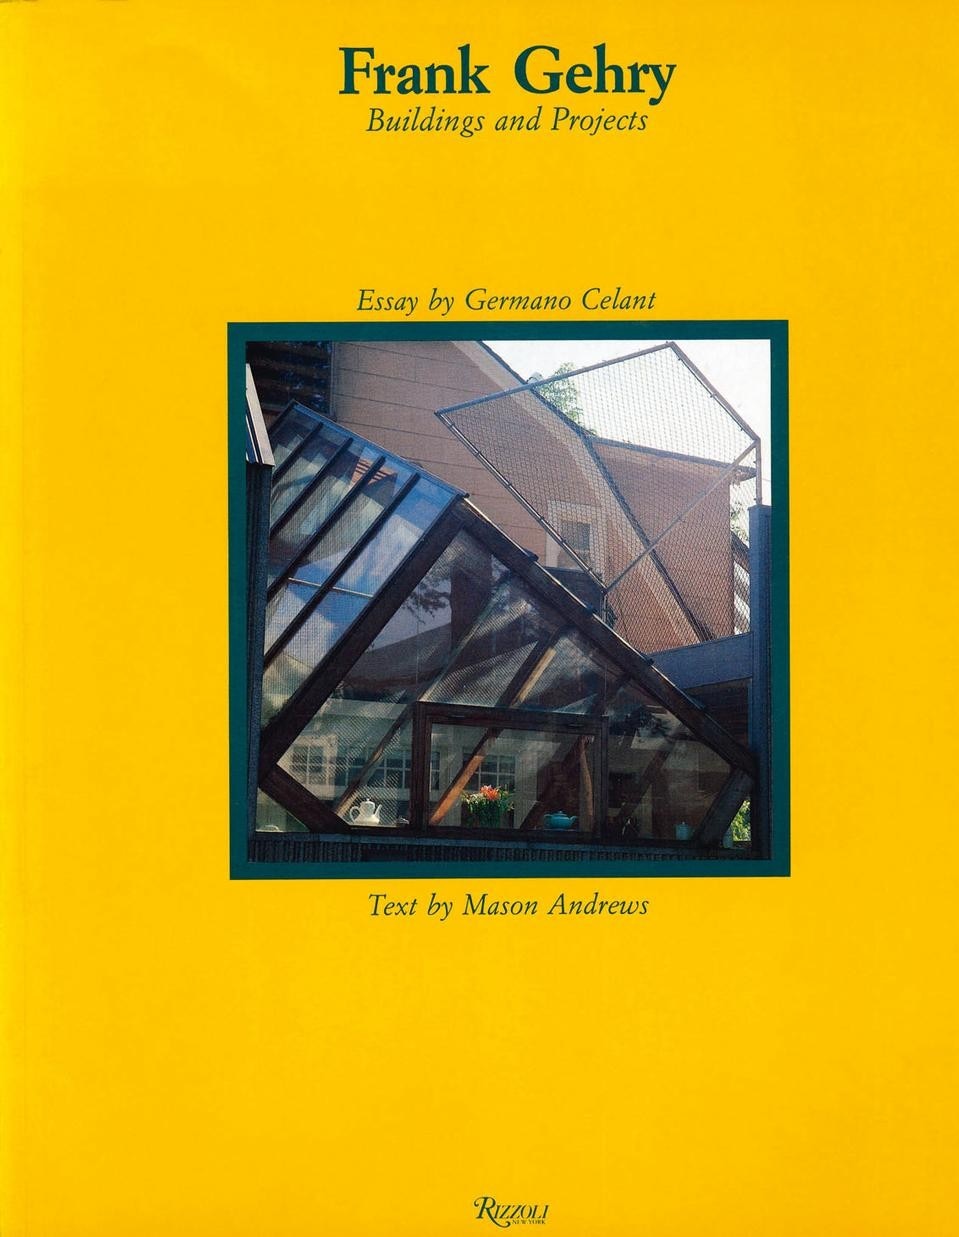 Cover of the book Frank Gehry.
<i>Frank
Gehry. Buildings and Projects</i>, New York
1985